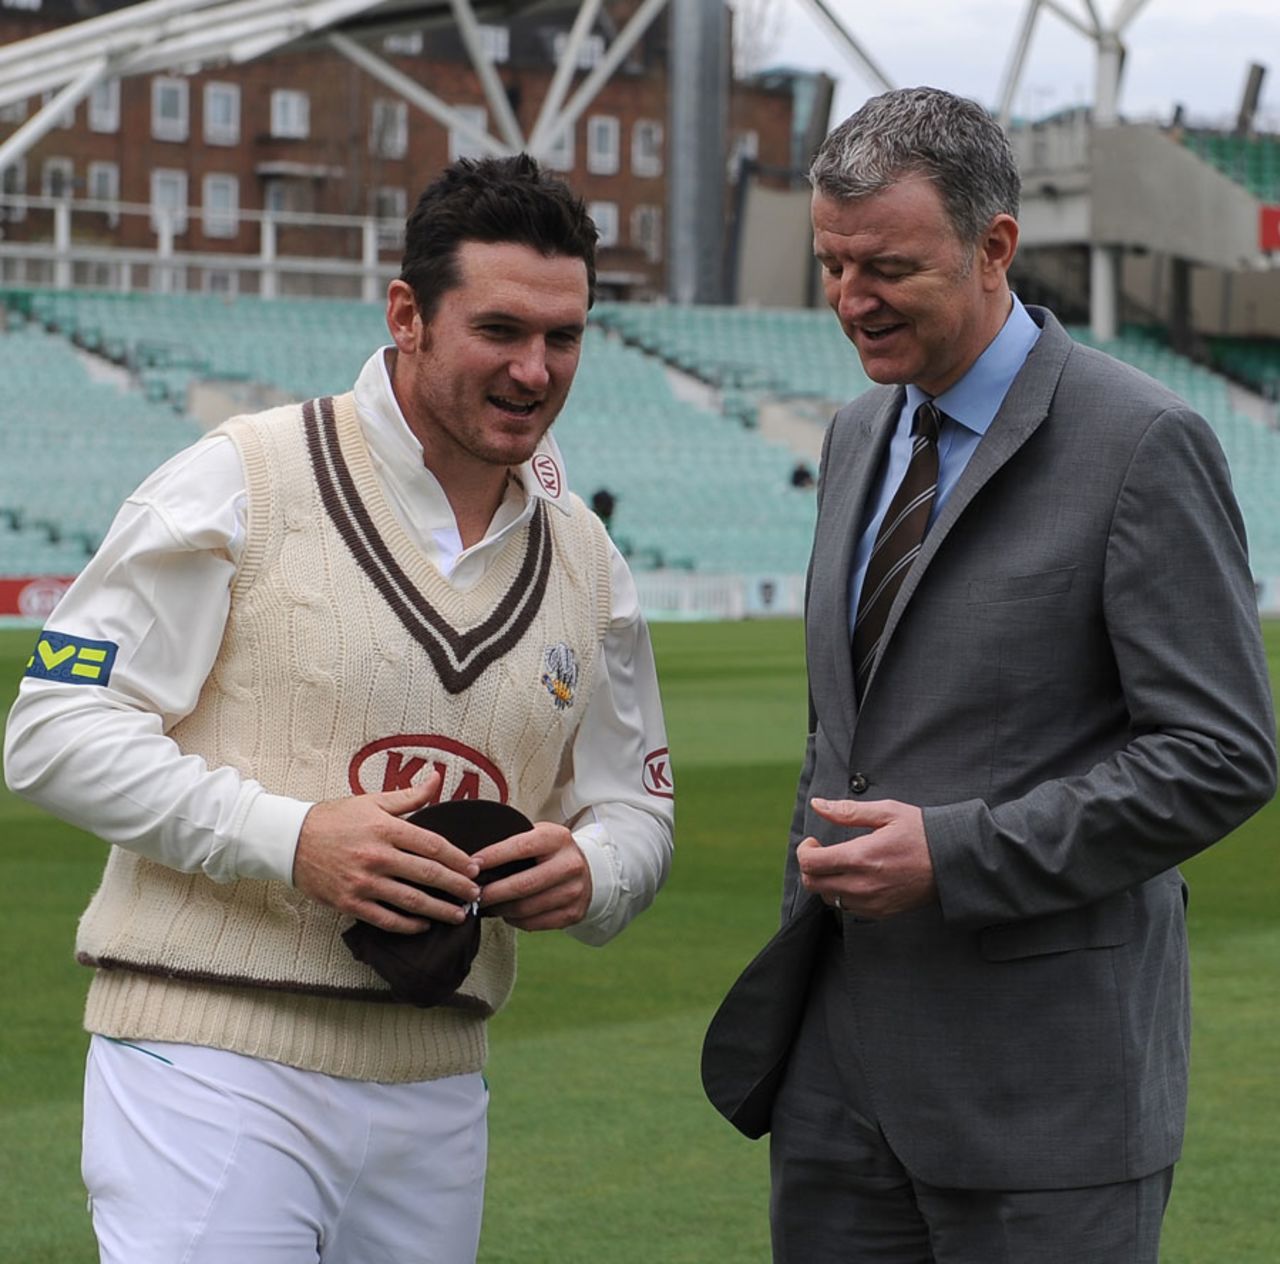 Graeme Smith receives his Surrey cap from Richard Thompson, Surrey v Somerset, County Championship, Division One, The Oval, 1st day, April 17, 2013